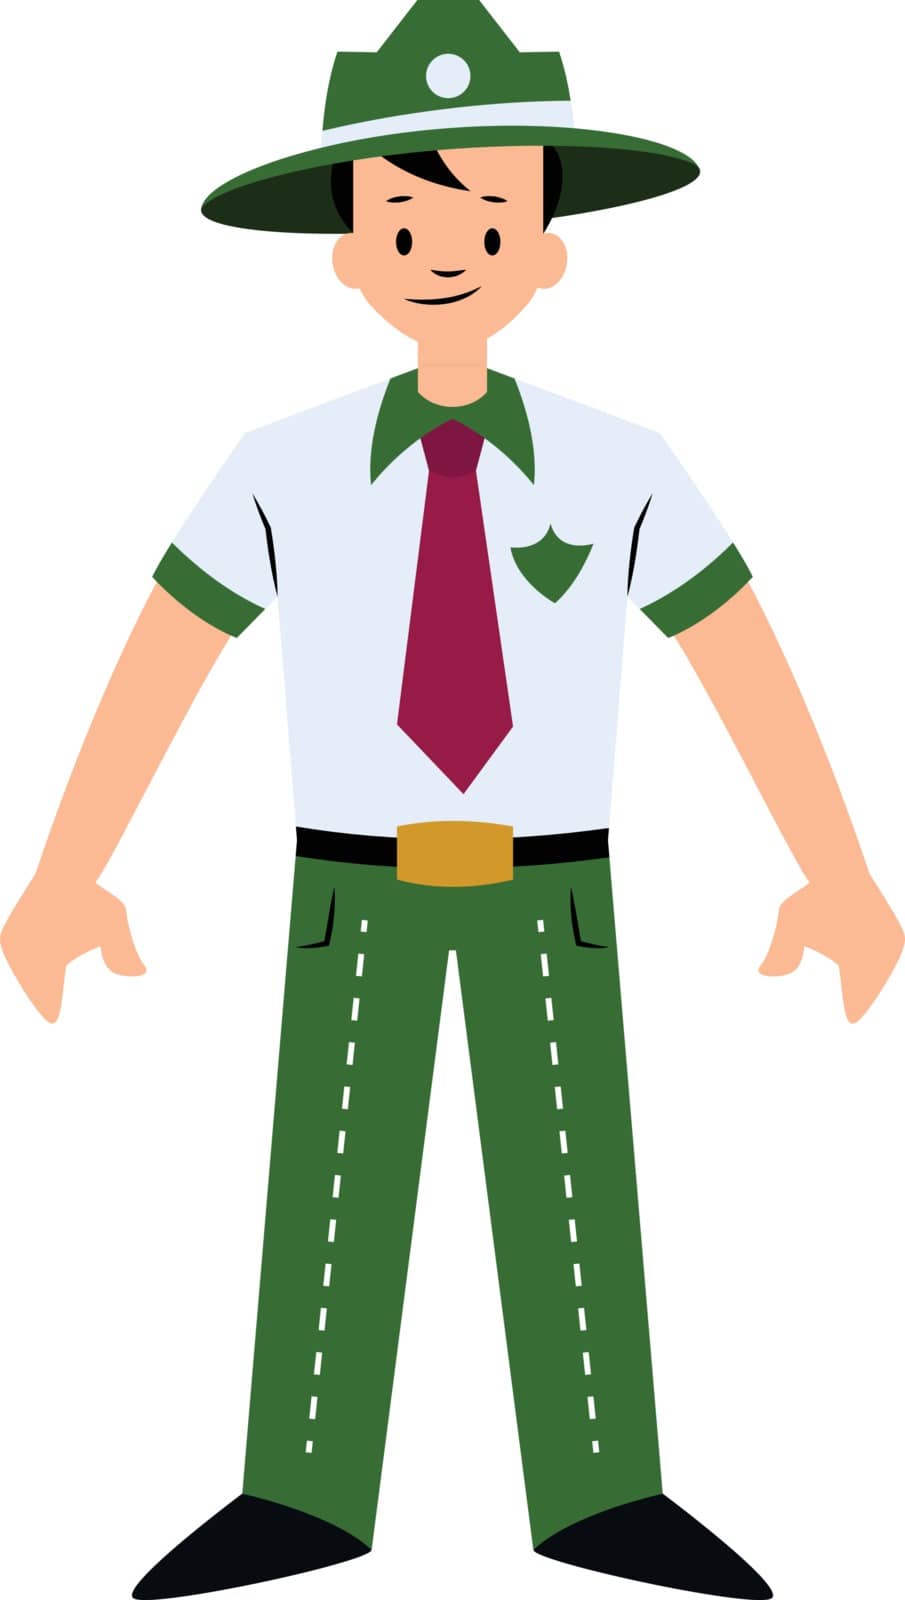 Forest guard character vector illustration on a white background